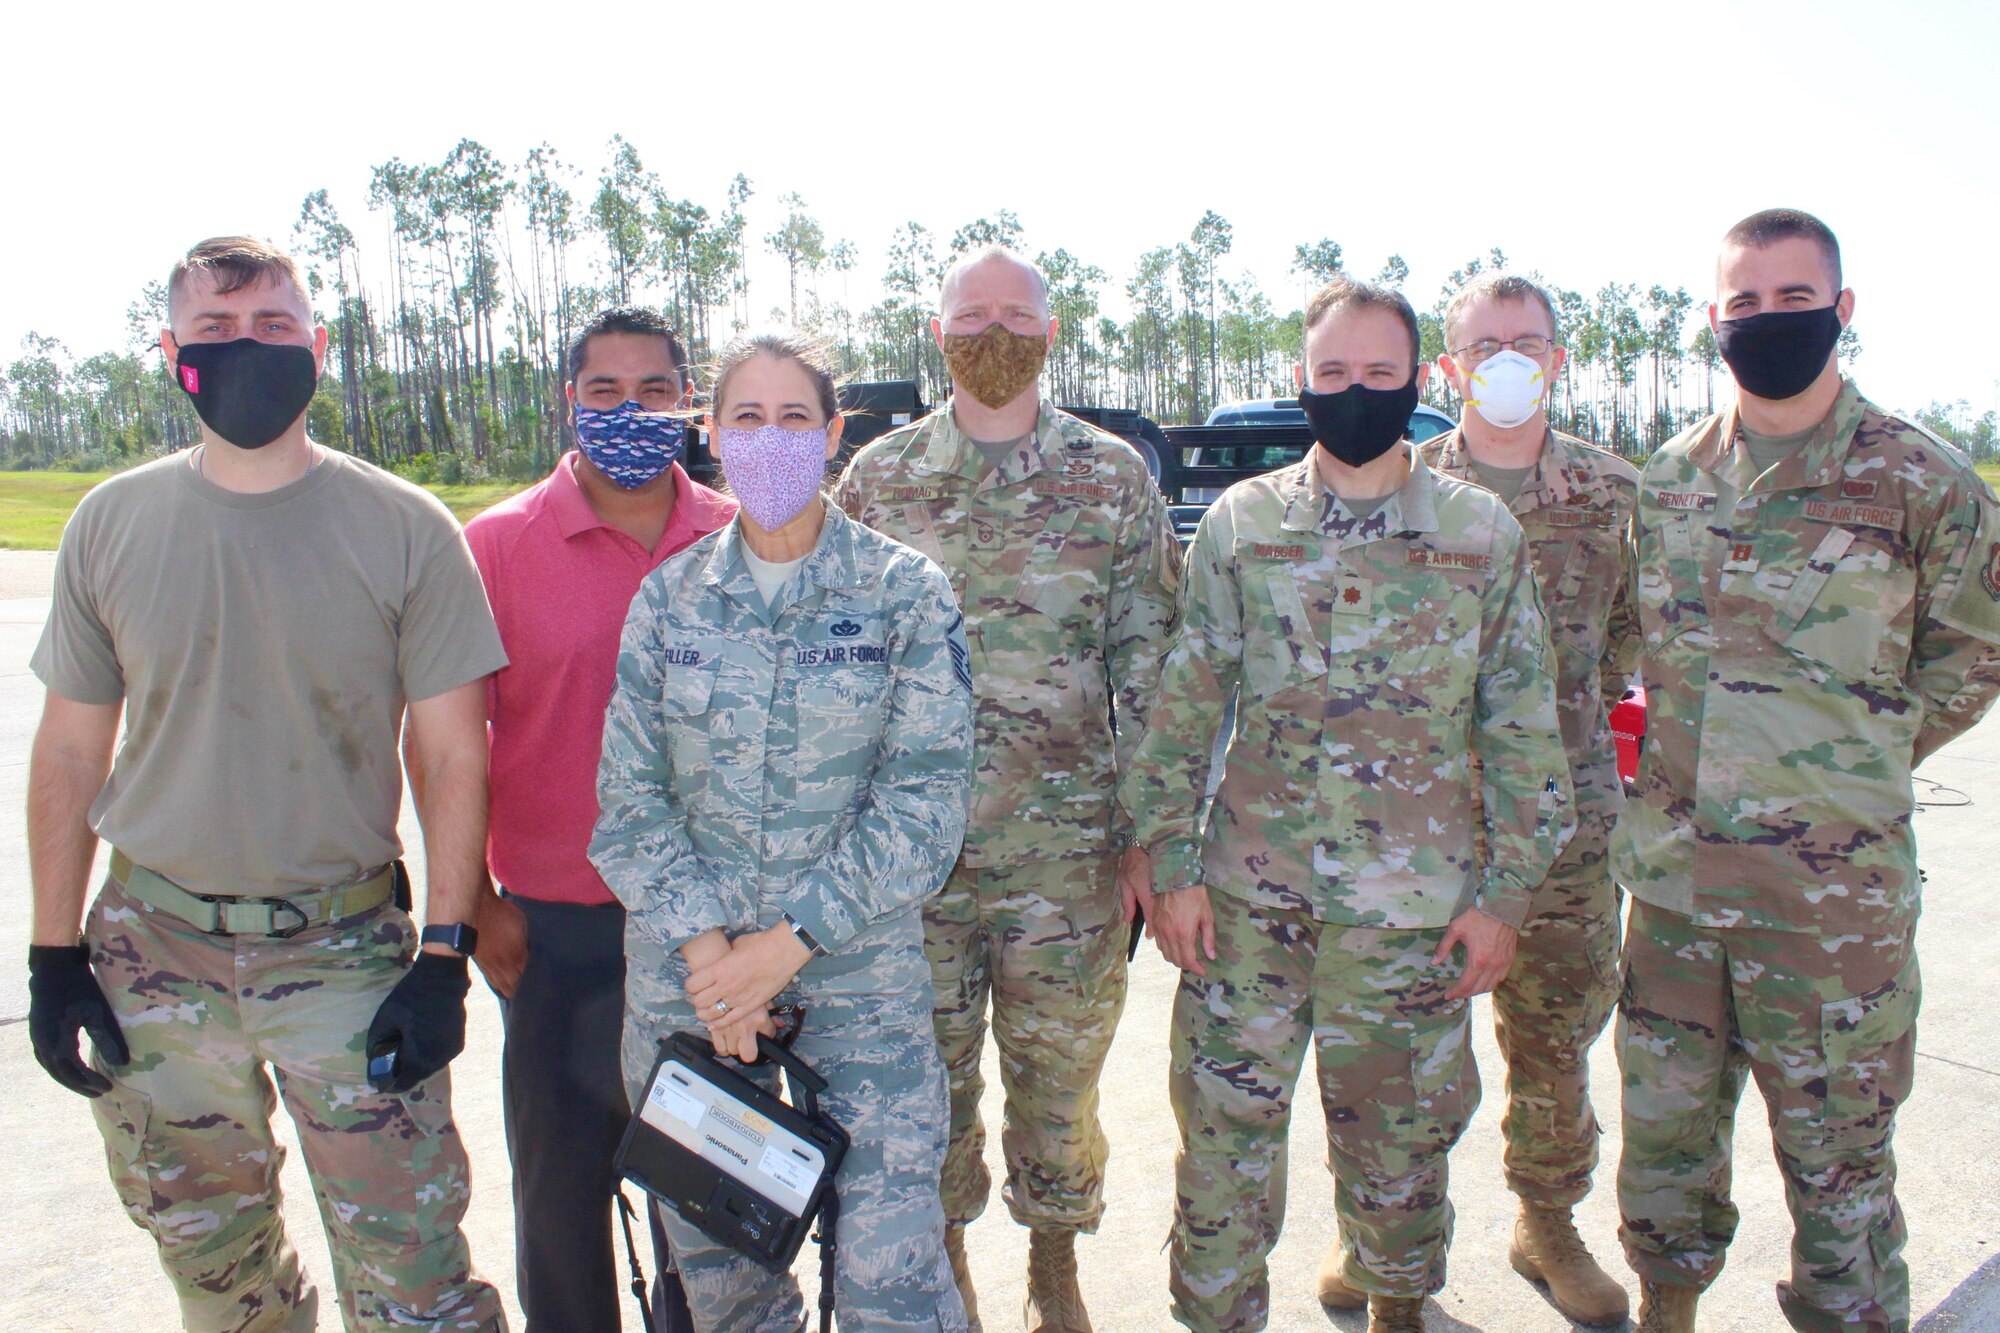 Group photo of APE and AFIT personnel at Tyndall AFB, Florida.